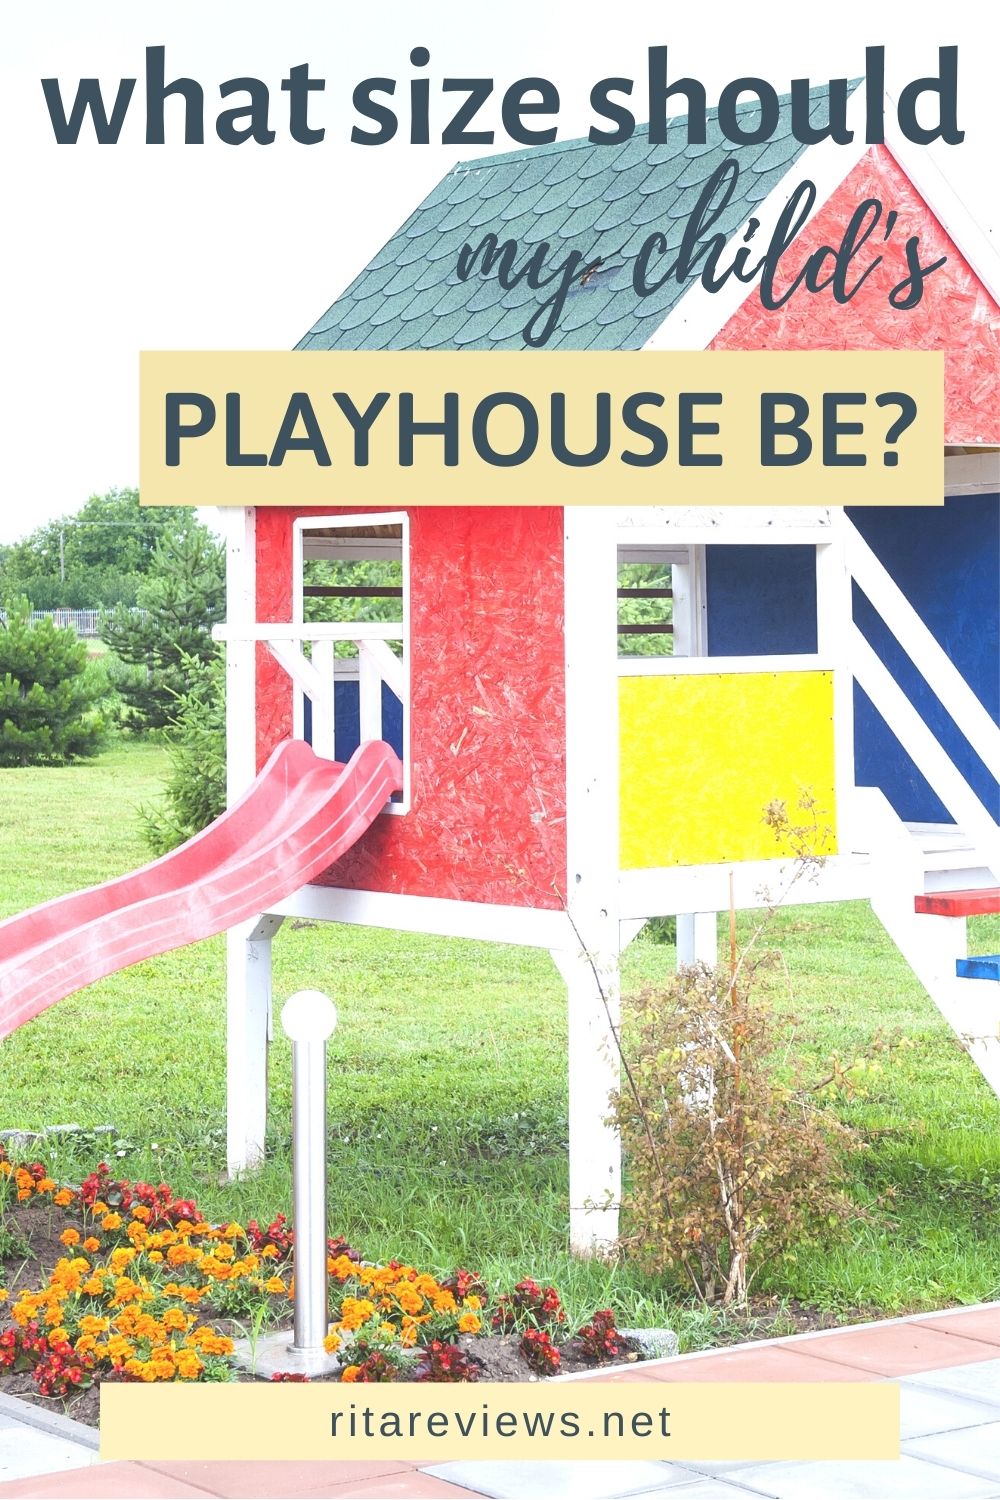 What Size Should My Child's Playhouse Be?